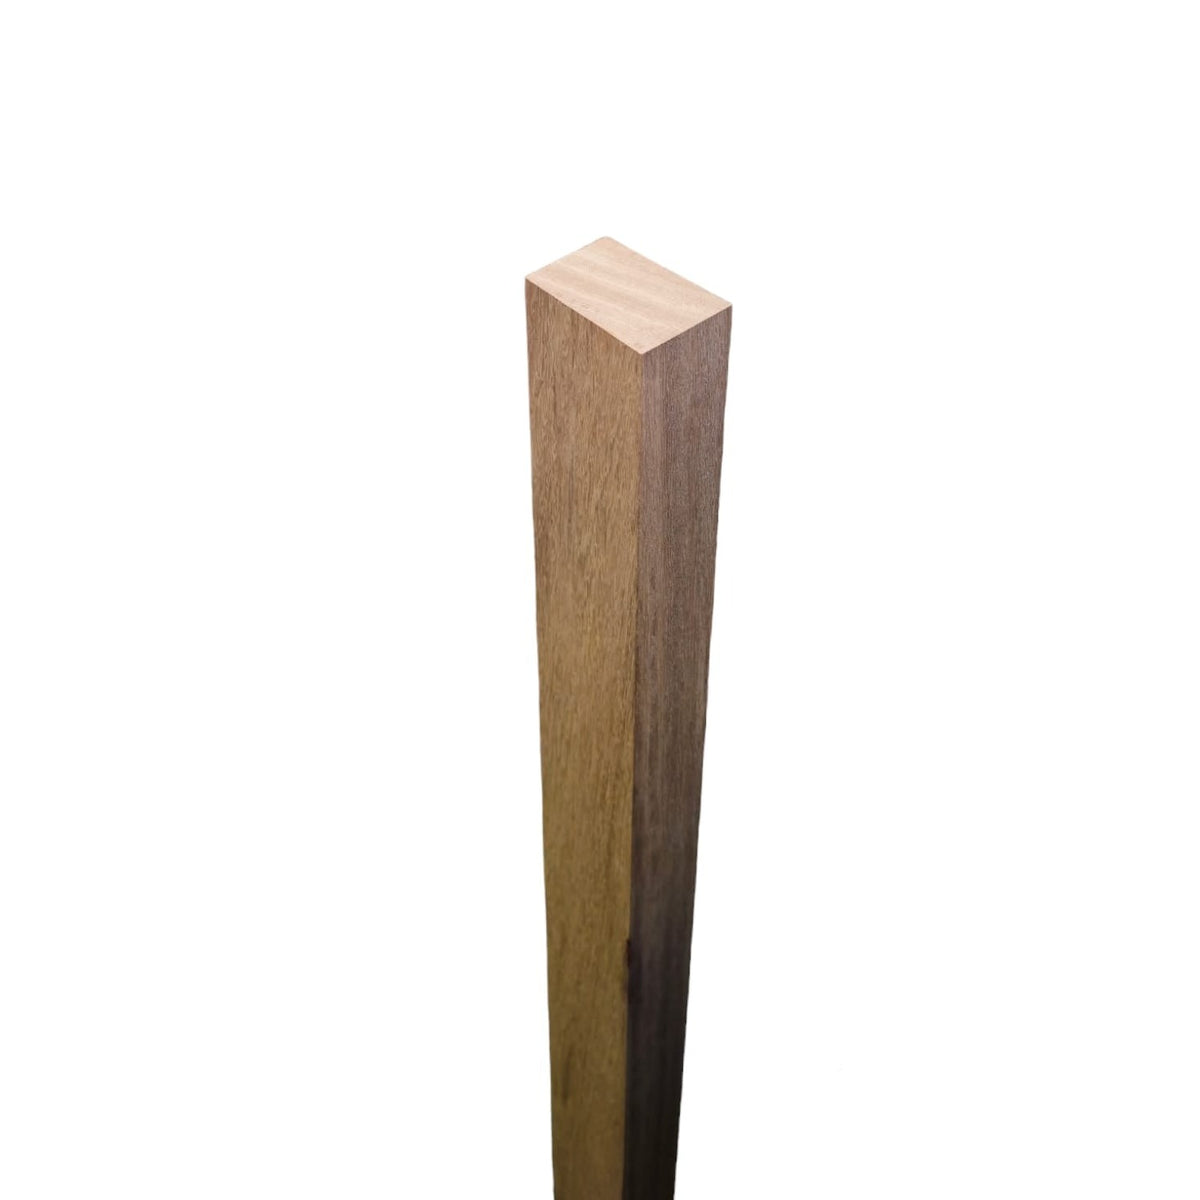 A wall post made of Iroko wood, measuring 95mm x 45mm